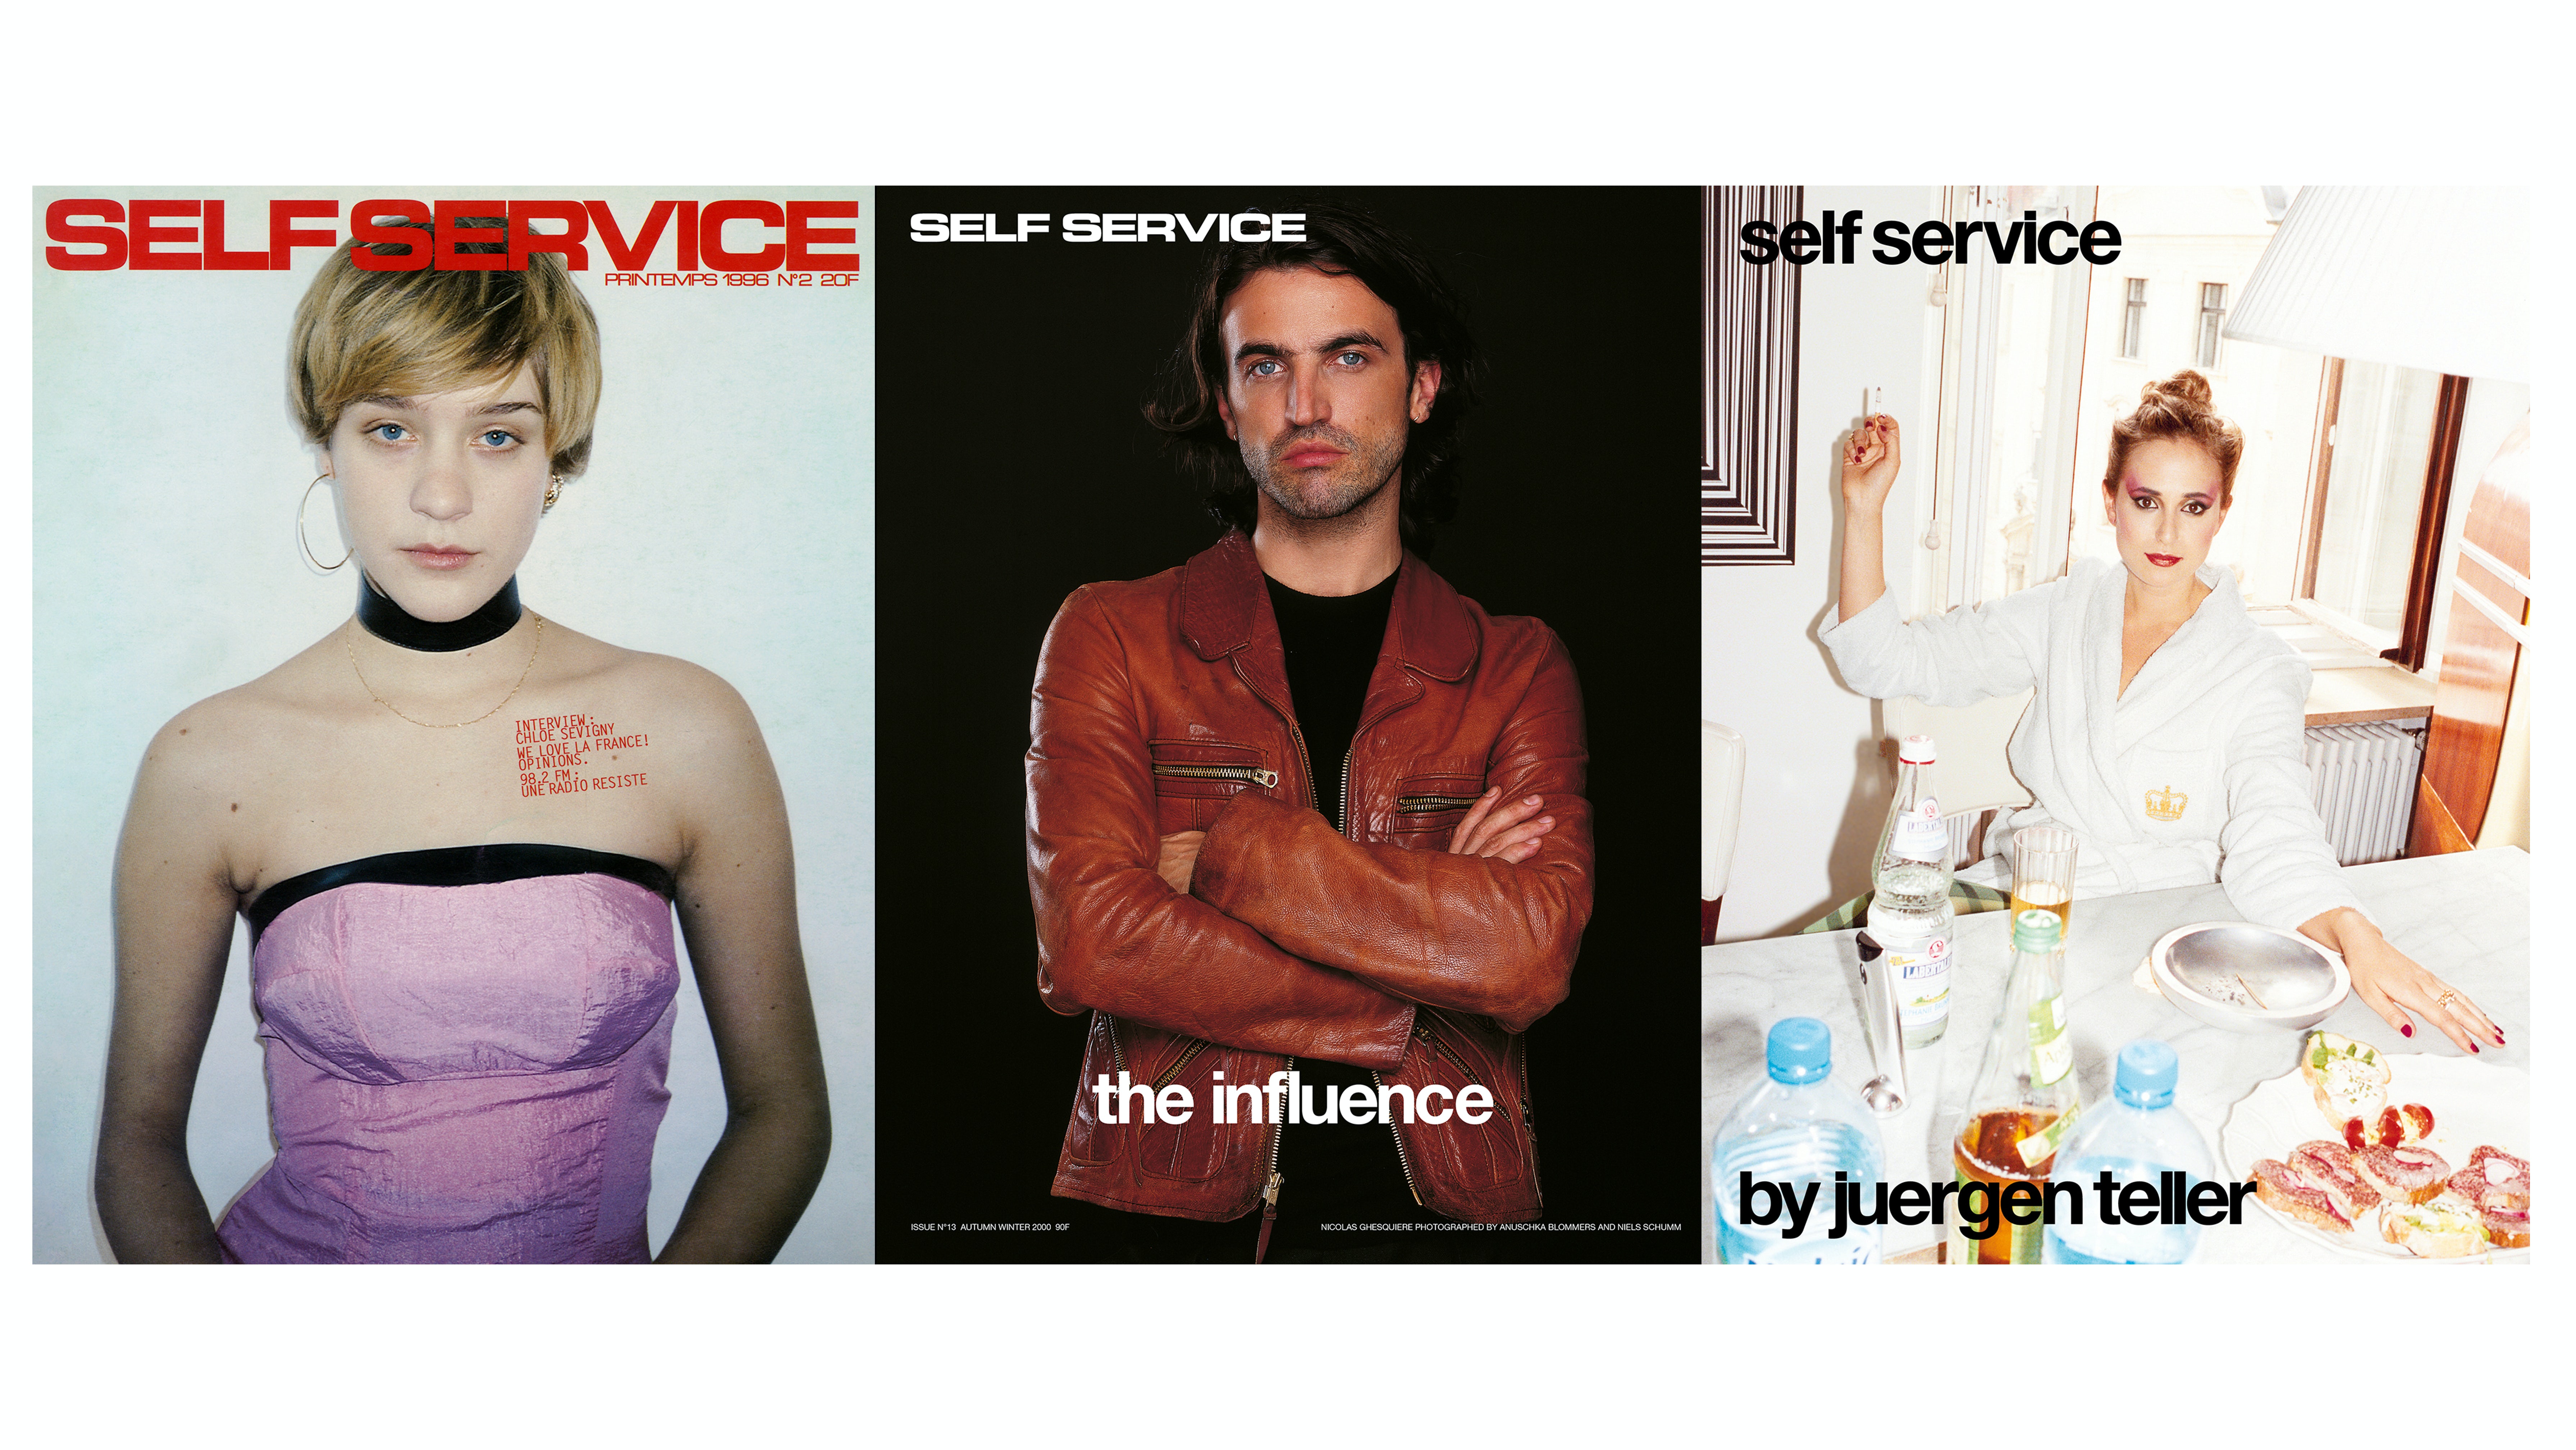 Self Service Marks 25 Years with Nicolas Ghesquière Covers | BoF